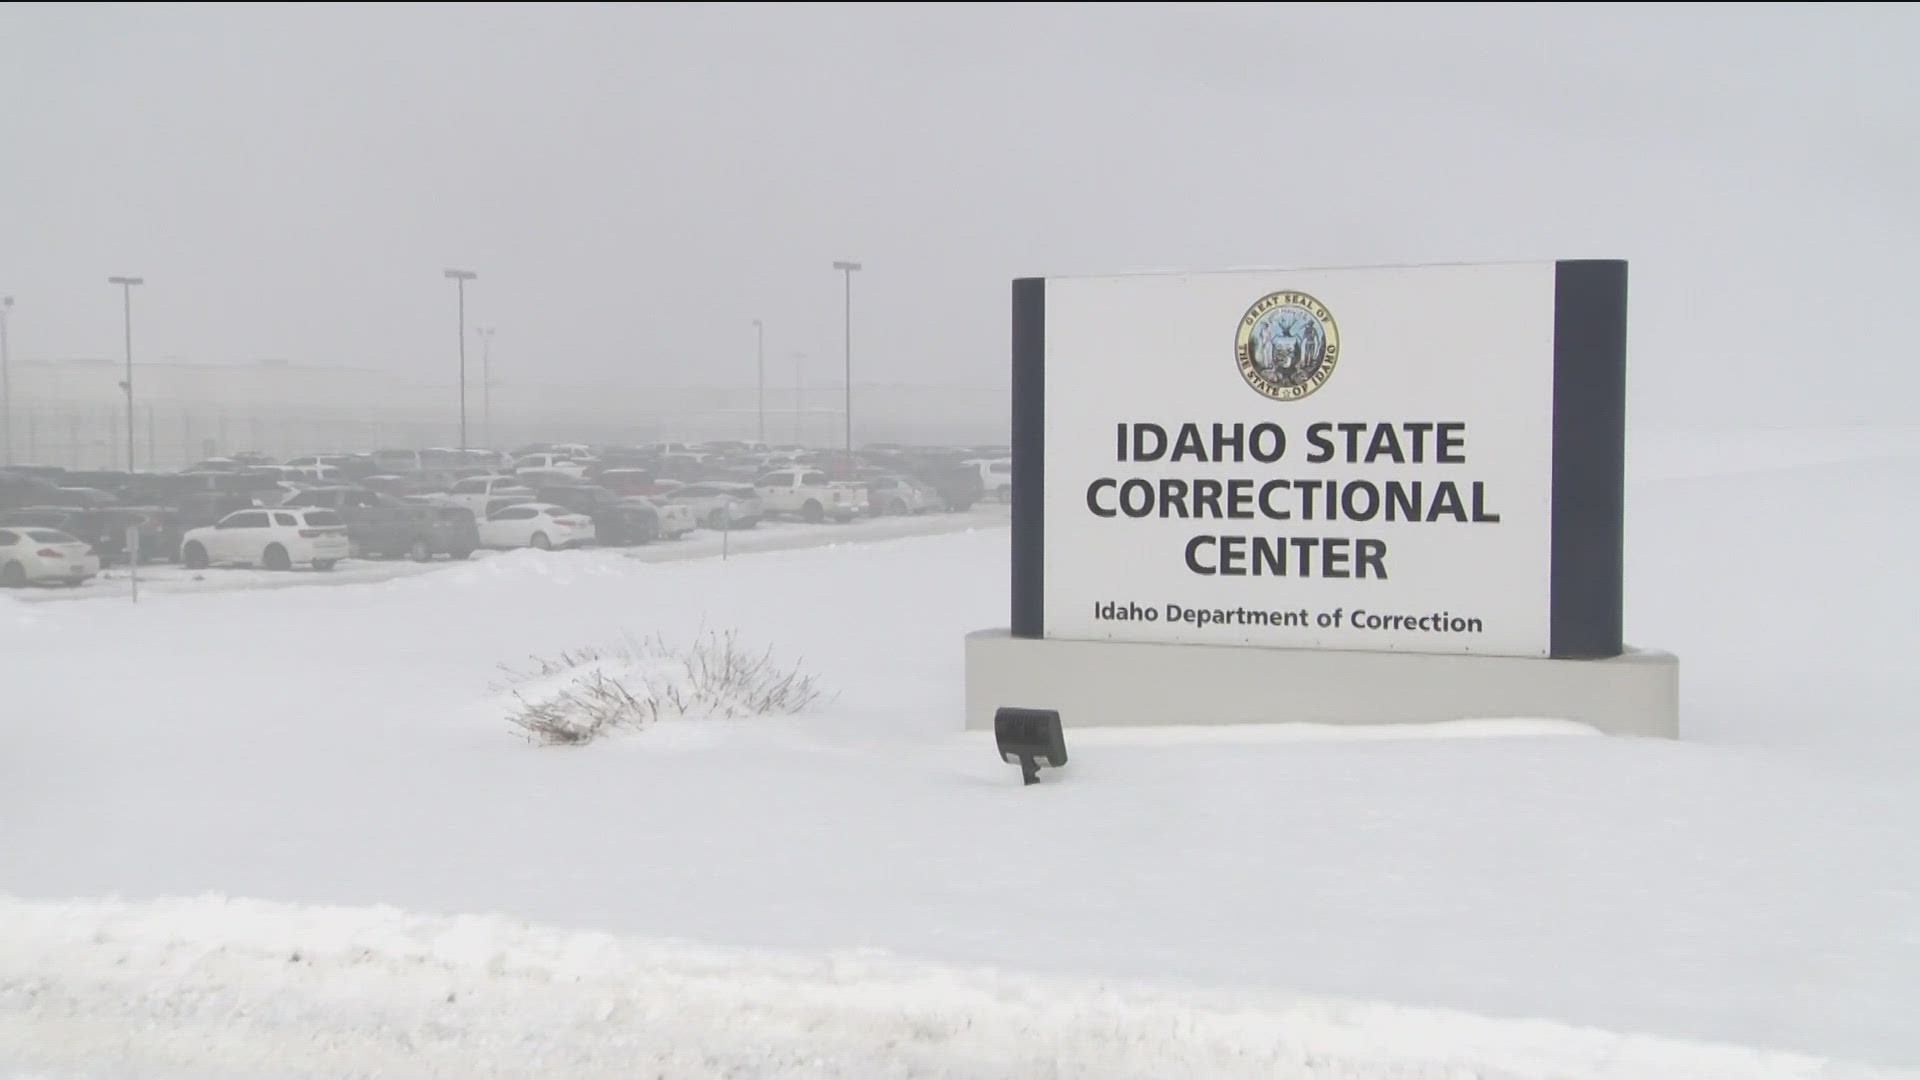 An inmate's mother reached out to KTVB, stating her son is experiencing frigid temperatures during Idaho's cold snap.